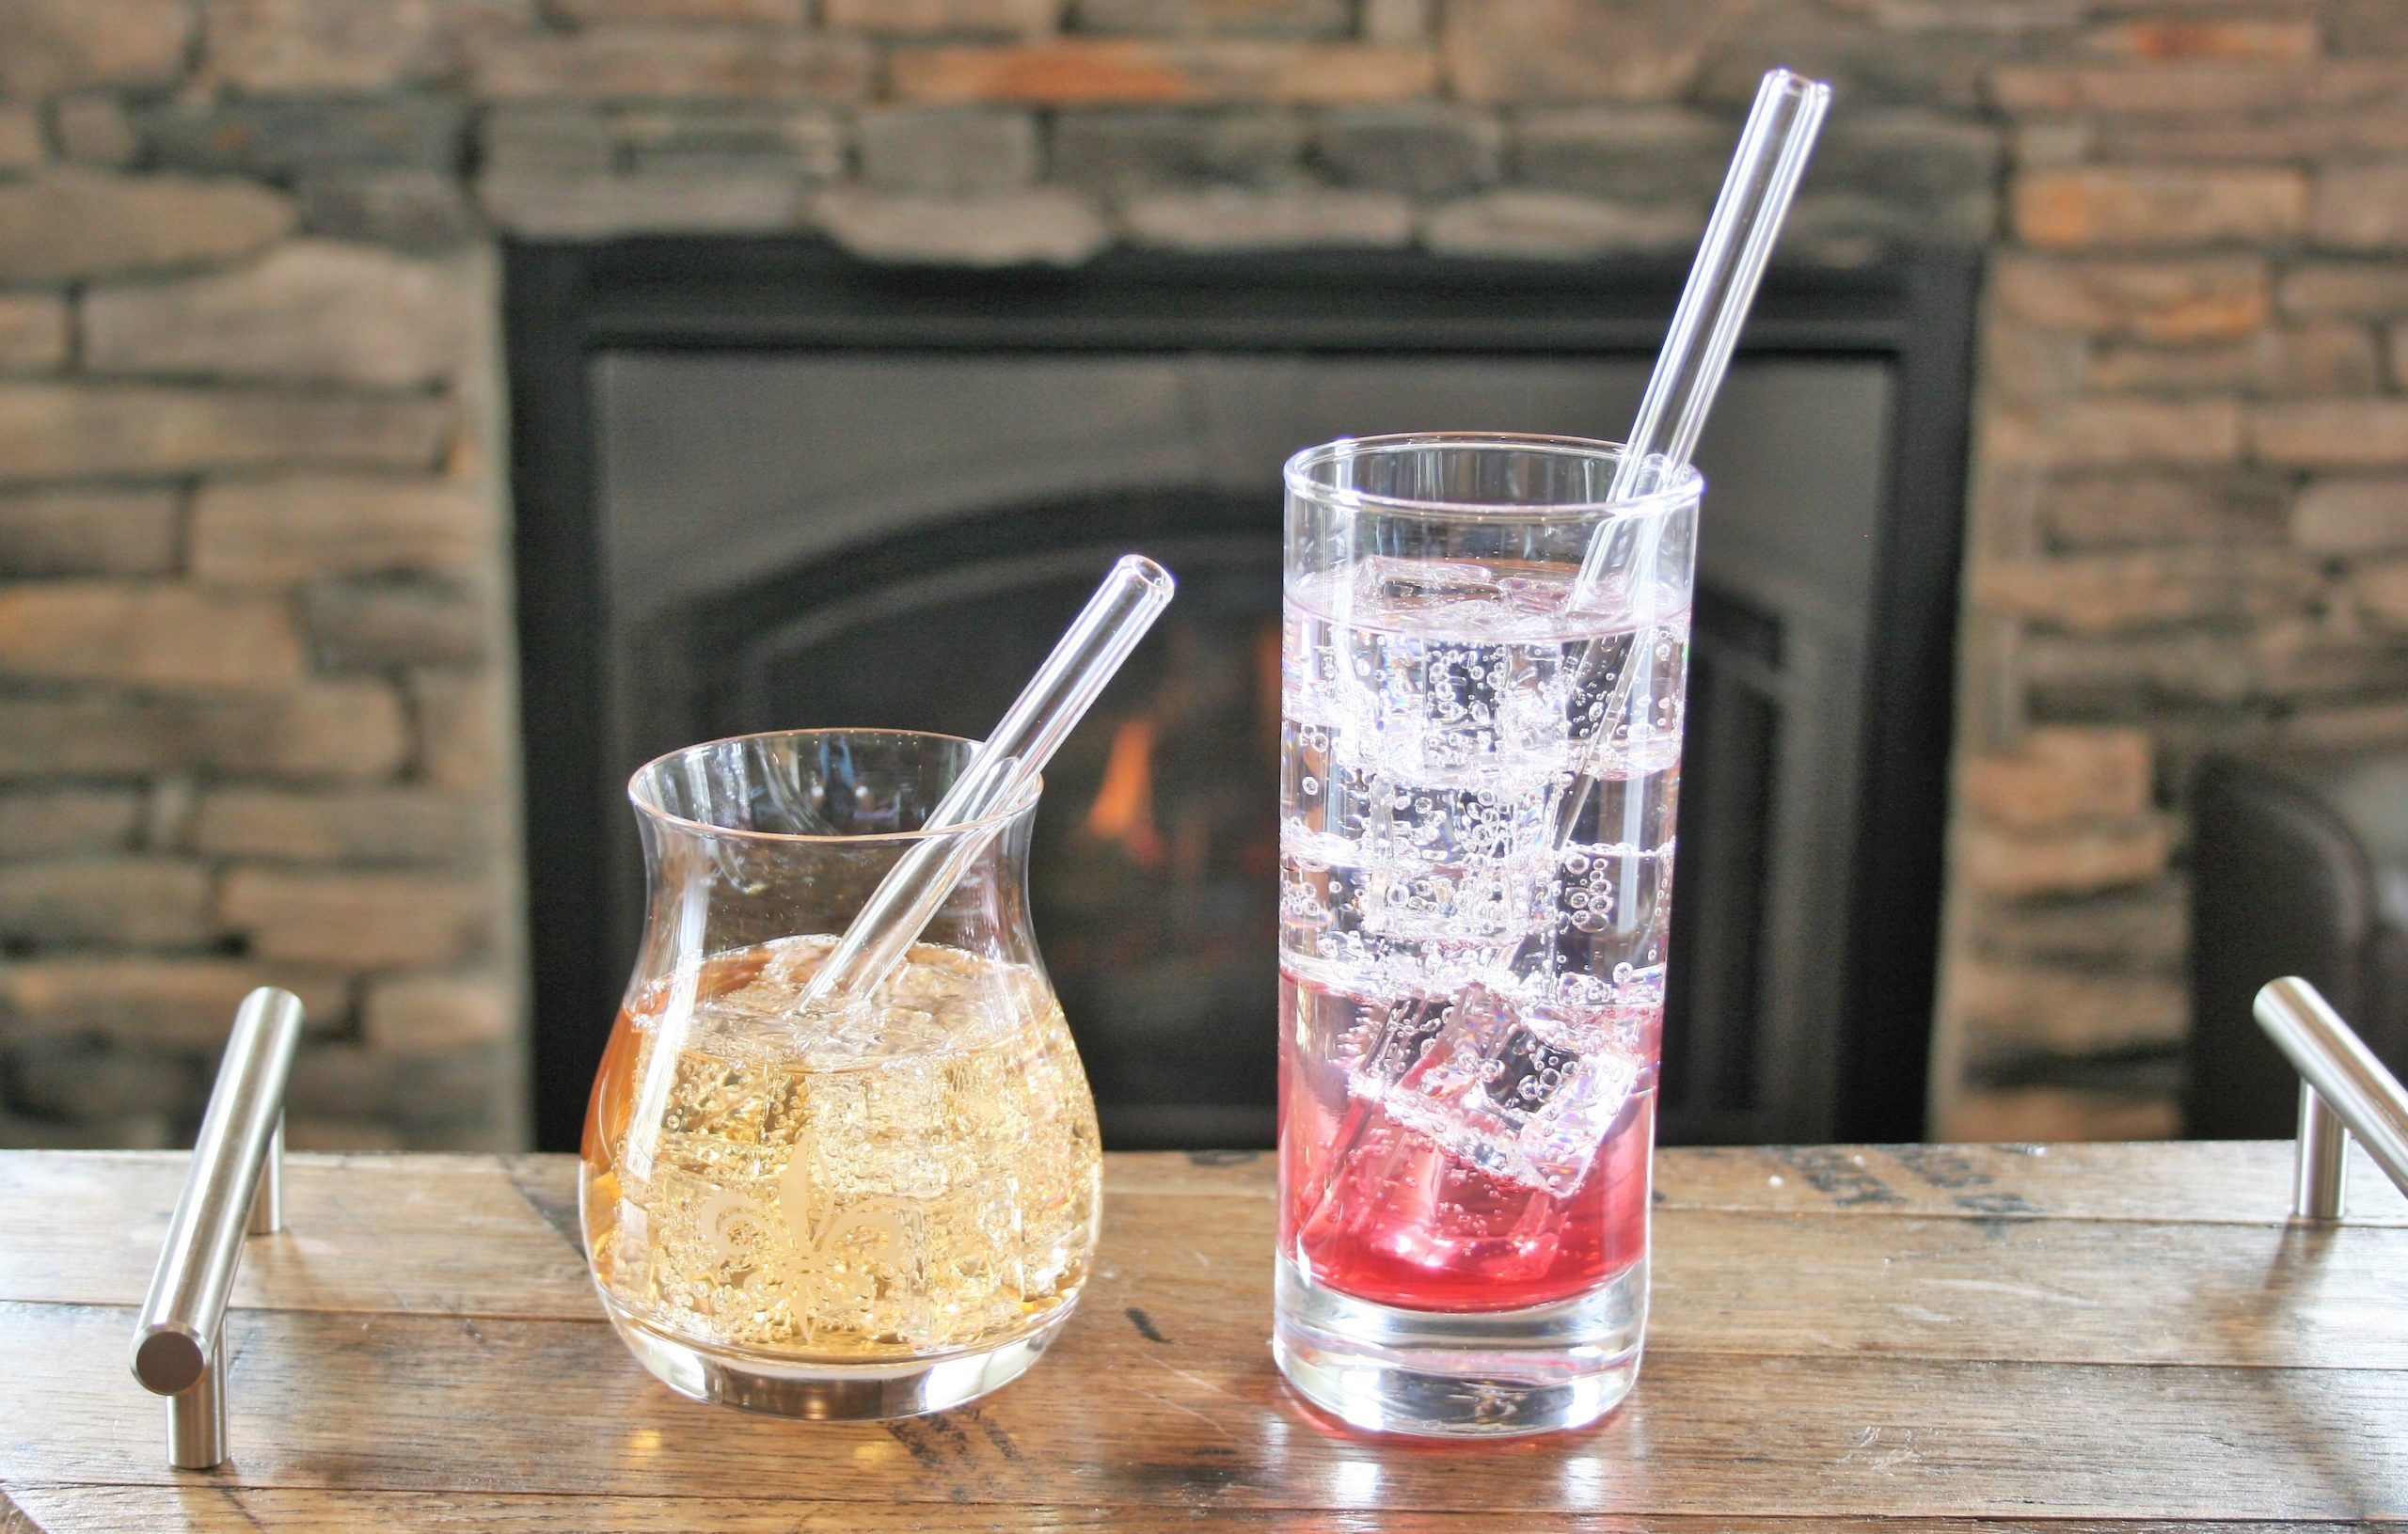 https://whiskeybytheglass.com/wp-content/uploads/2018/11/cocktails-with-glass-straws-scaled.jpg